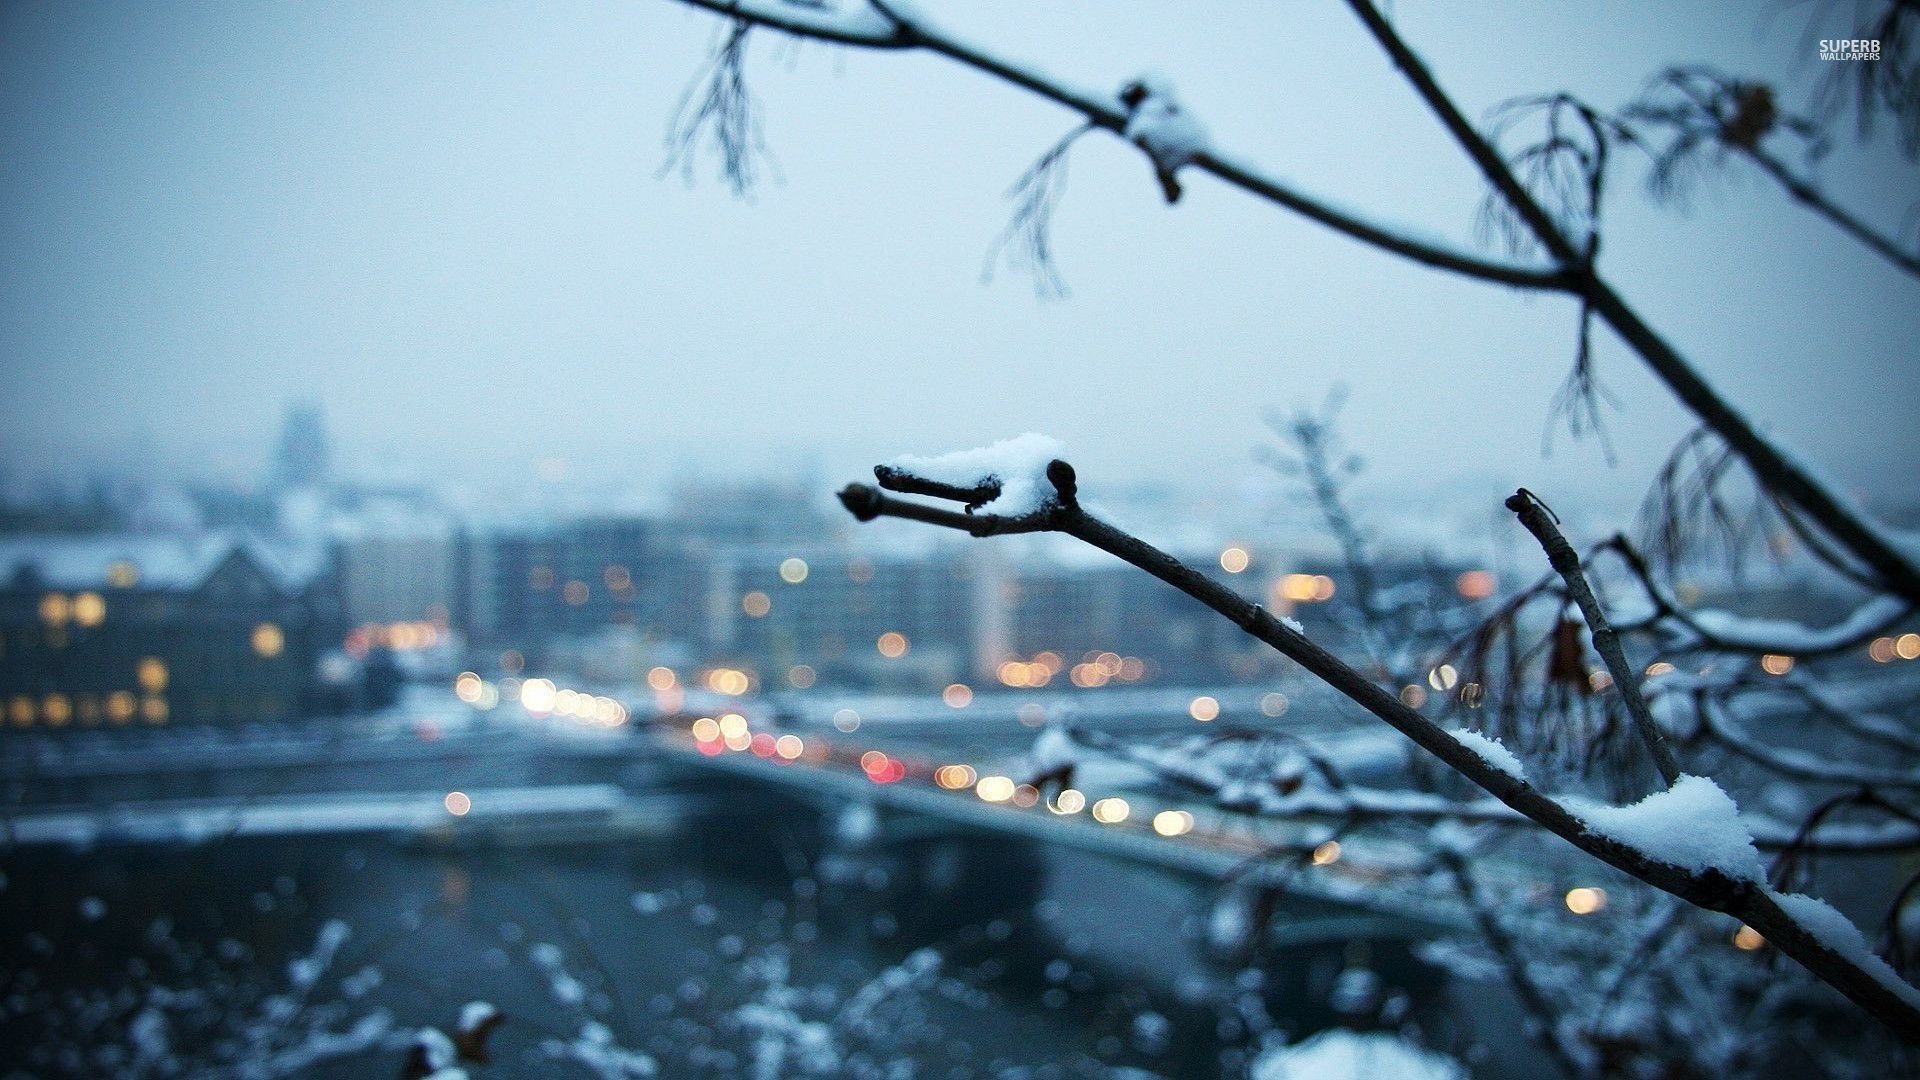 Snowy Branch With The City In Background